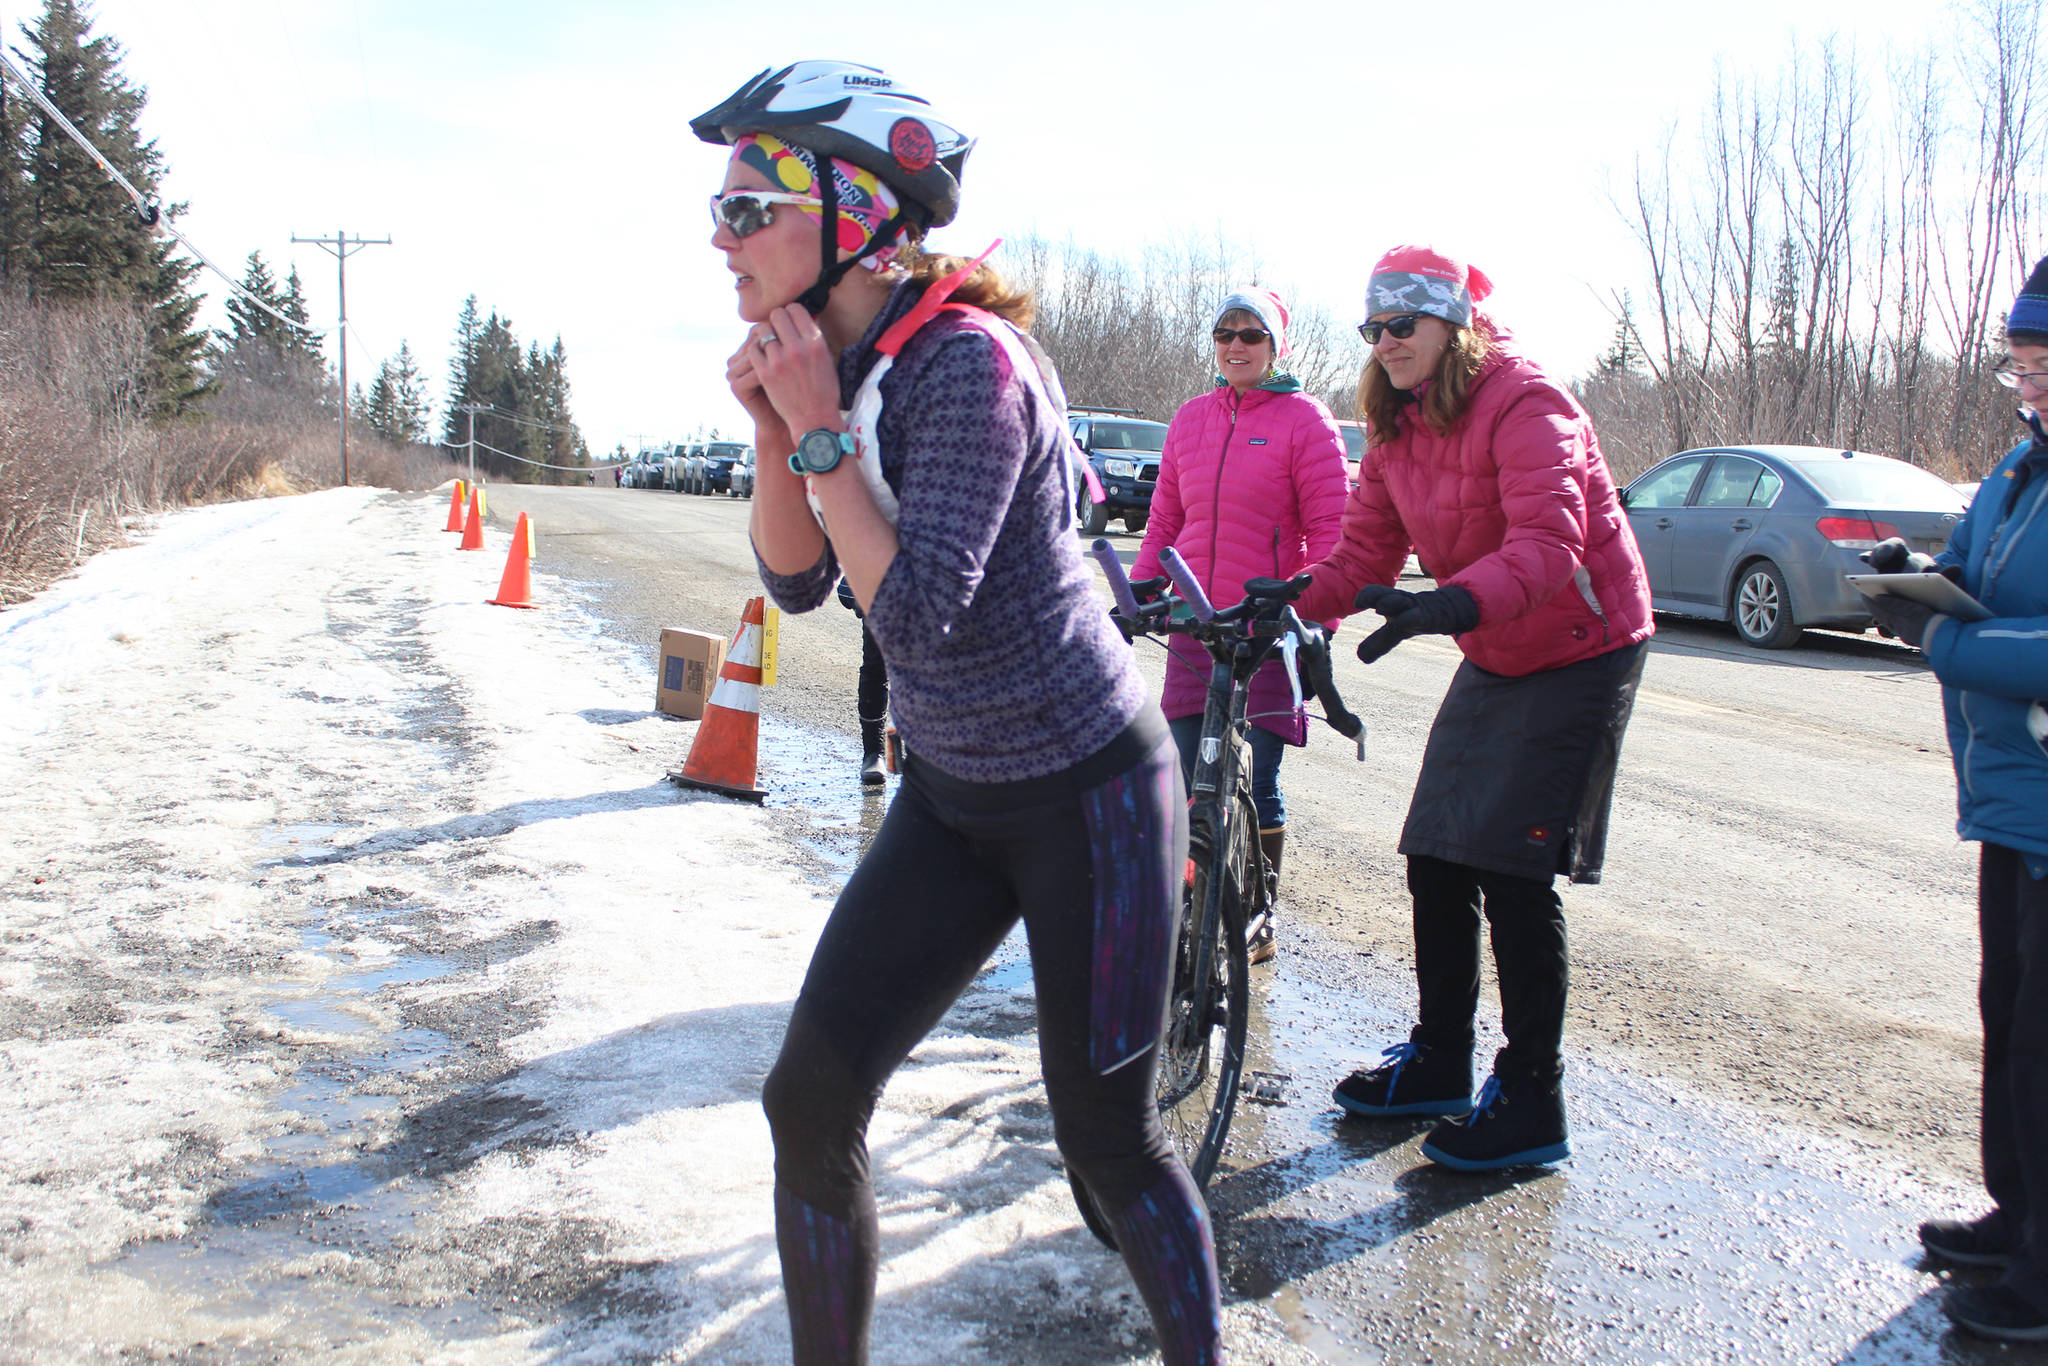 Annie Ridgely transitions from the cycling leg to the skiing leg of the Sea to Ski Triathlon on Sunday, March 25, 2018 at the Roger’s Loop Trailhead off Highland Drive in Homer, Alaska. The race starts down at Mariner Park on the Homer Spit and ends with a ski after a bike climb up West Hill Road. (Photo by Megan Pacer/Homer News)